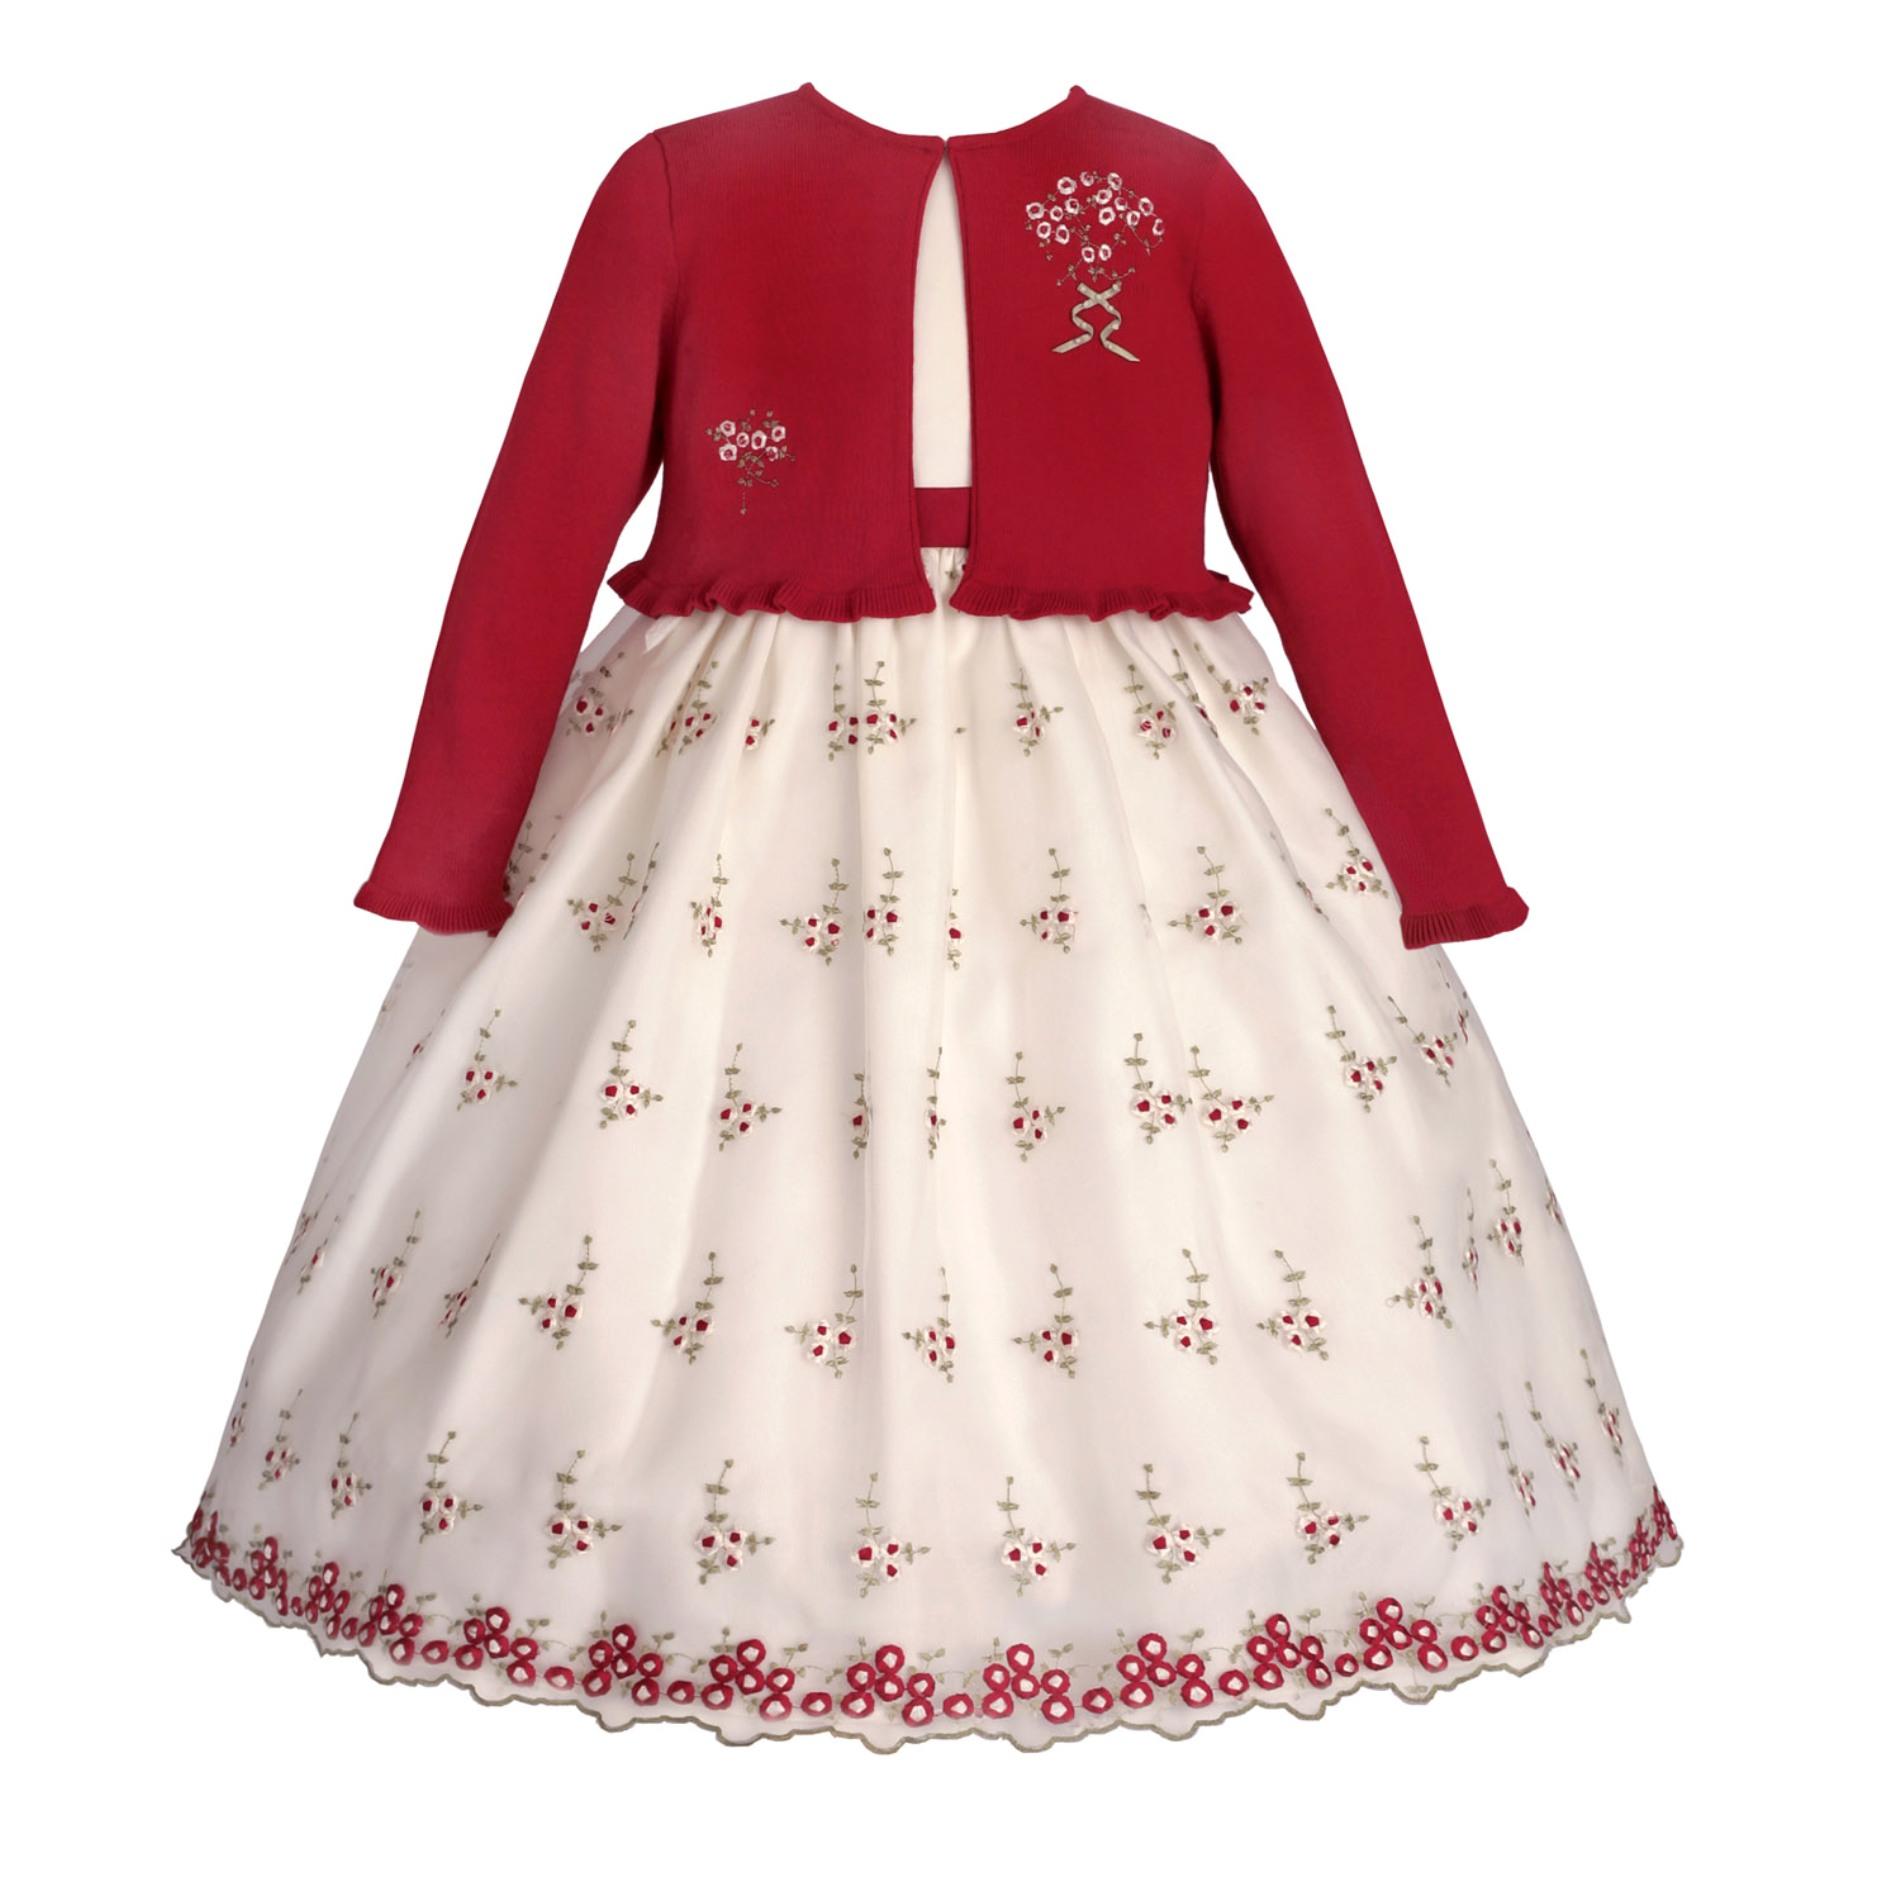 American Princess Girl's Party Dress & Cardigan - Floral Embroidery